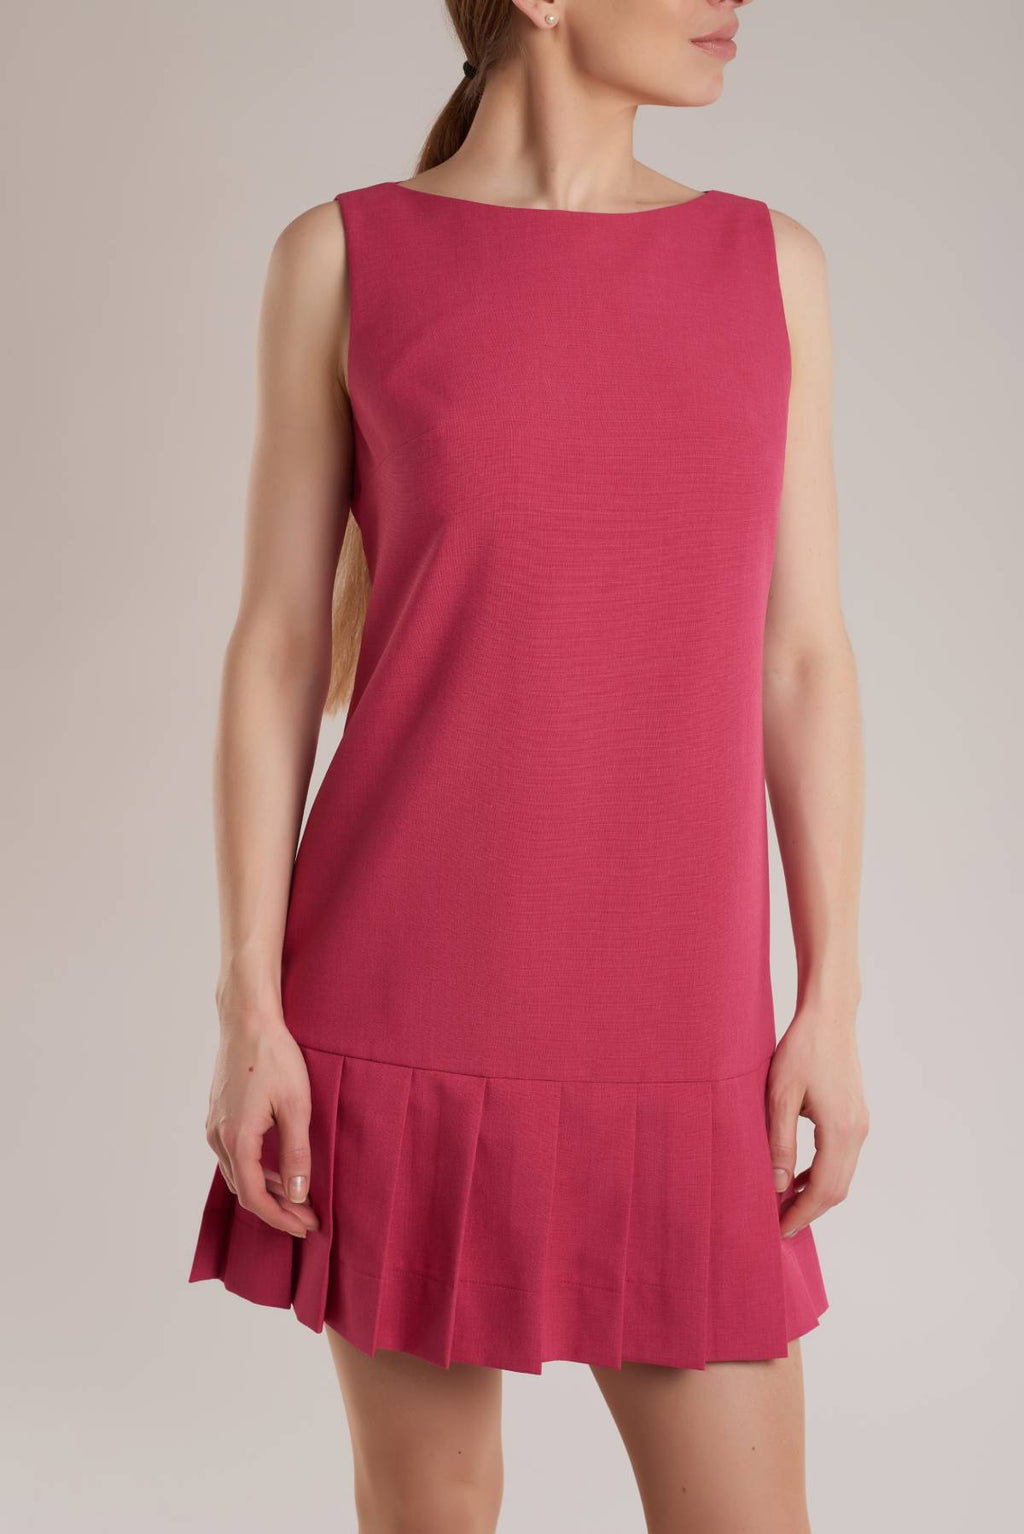 A mini fuchsia dress has an A-line shape with a boat neck, a pleated hem and a concealed zip fastening at back. 